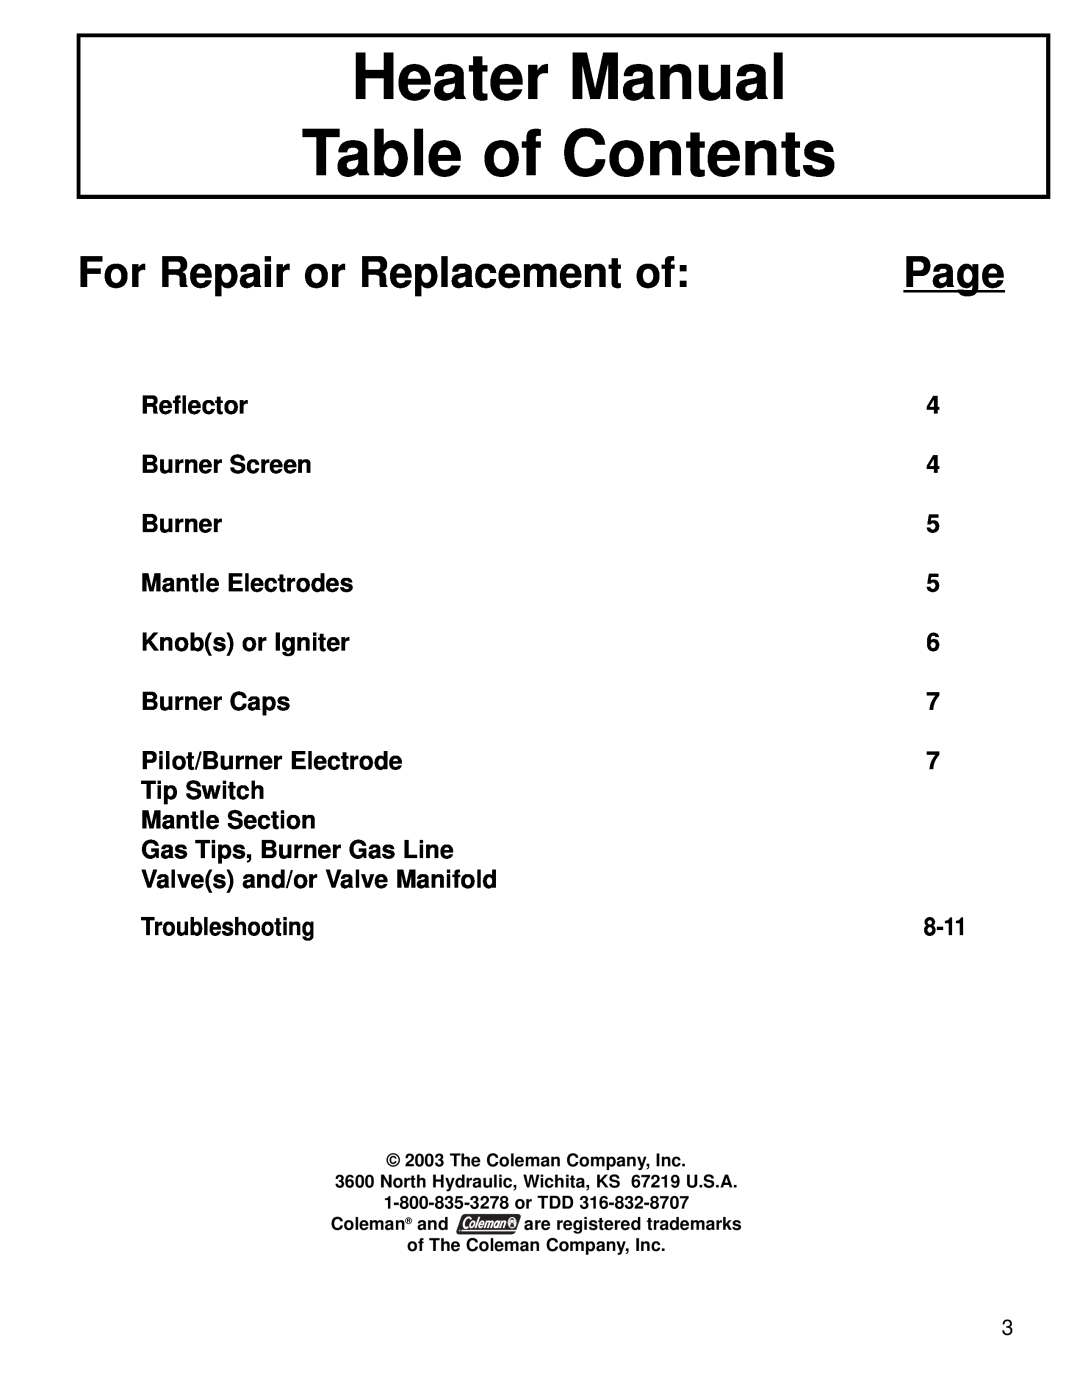 Coleman 5040 manual Heater Manual Table of Contents, For Repair or Replacement of, Page 